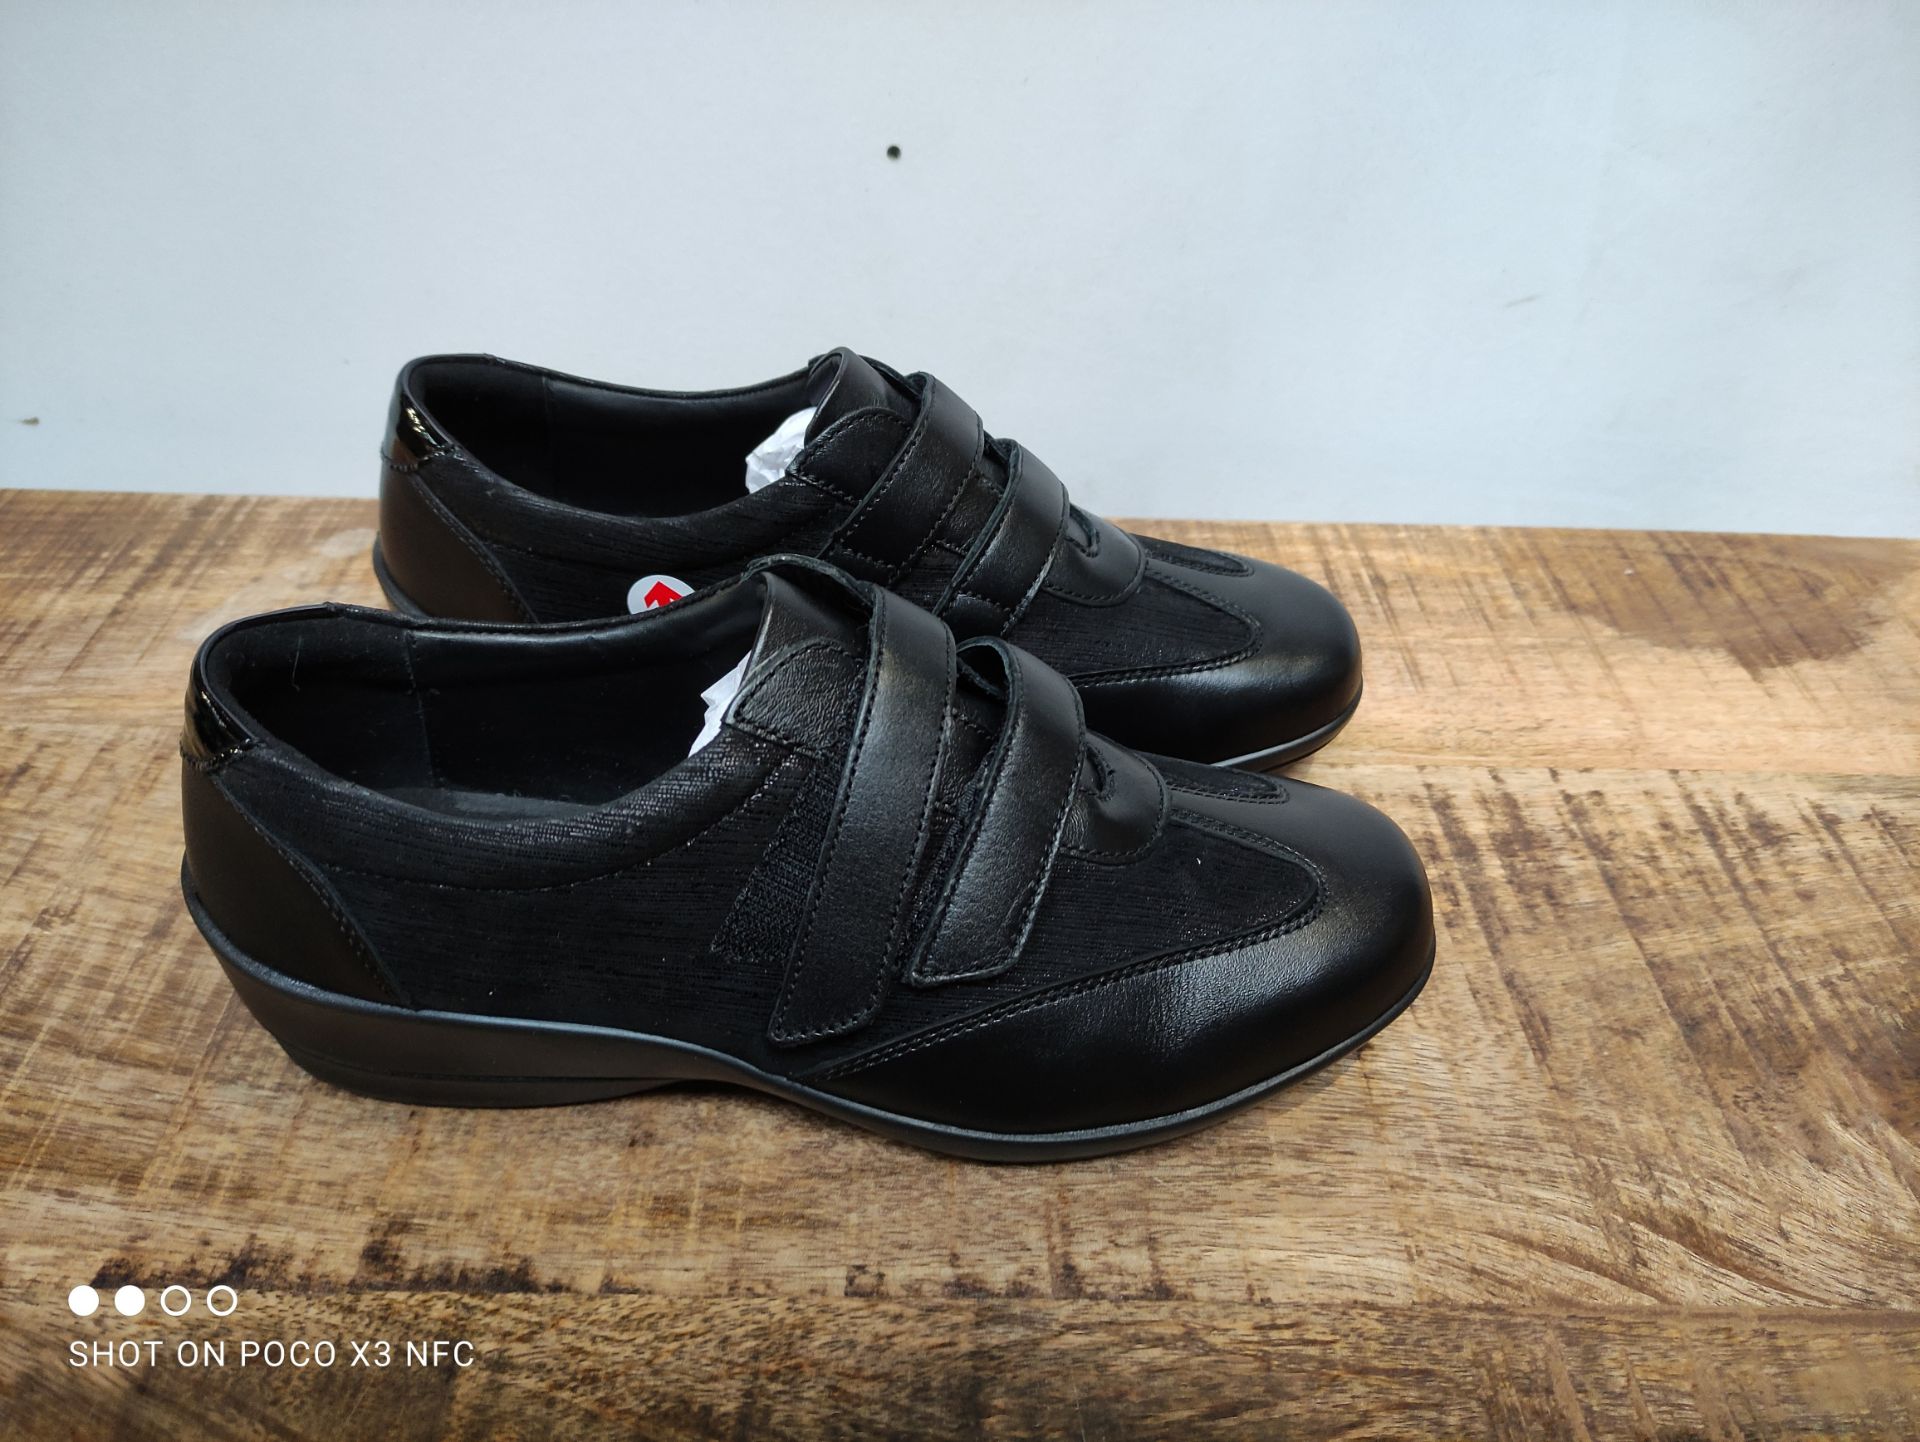 UNBOXED WOMENS SIZE 6 WIDE FIT BLACK PADDERS SADIE SHOES RRP £42.99Condition ReportAppraisal